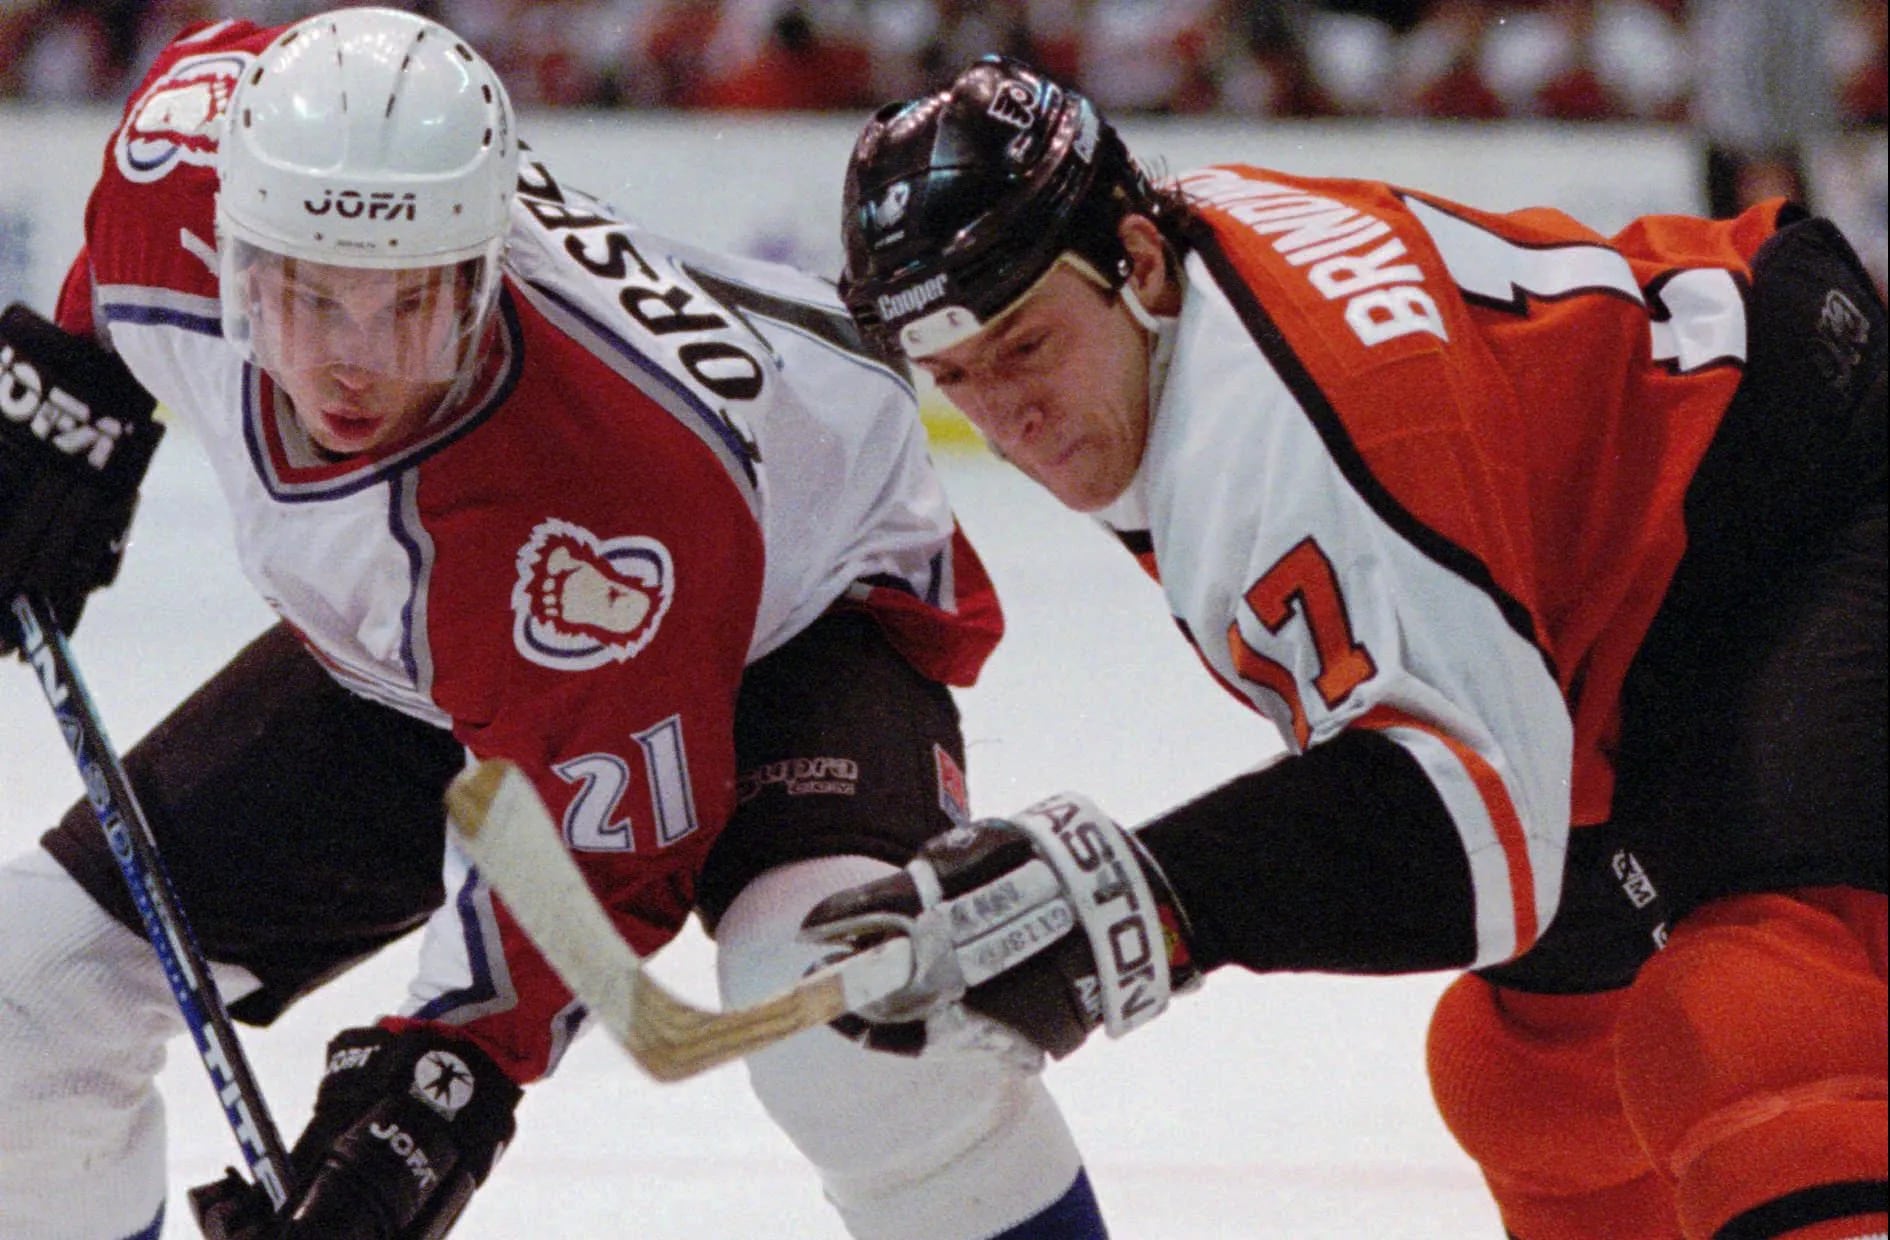 Ex-Michigan State hockey player Rod Brind'Amour is all about Carolina now